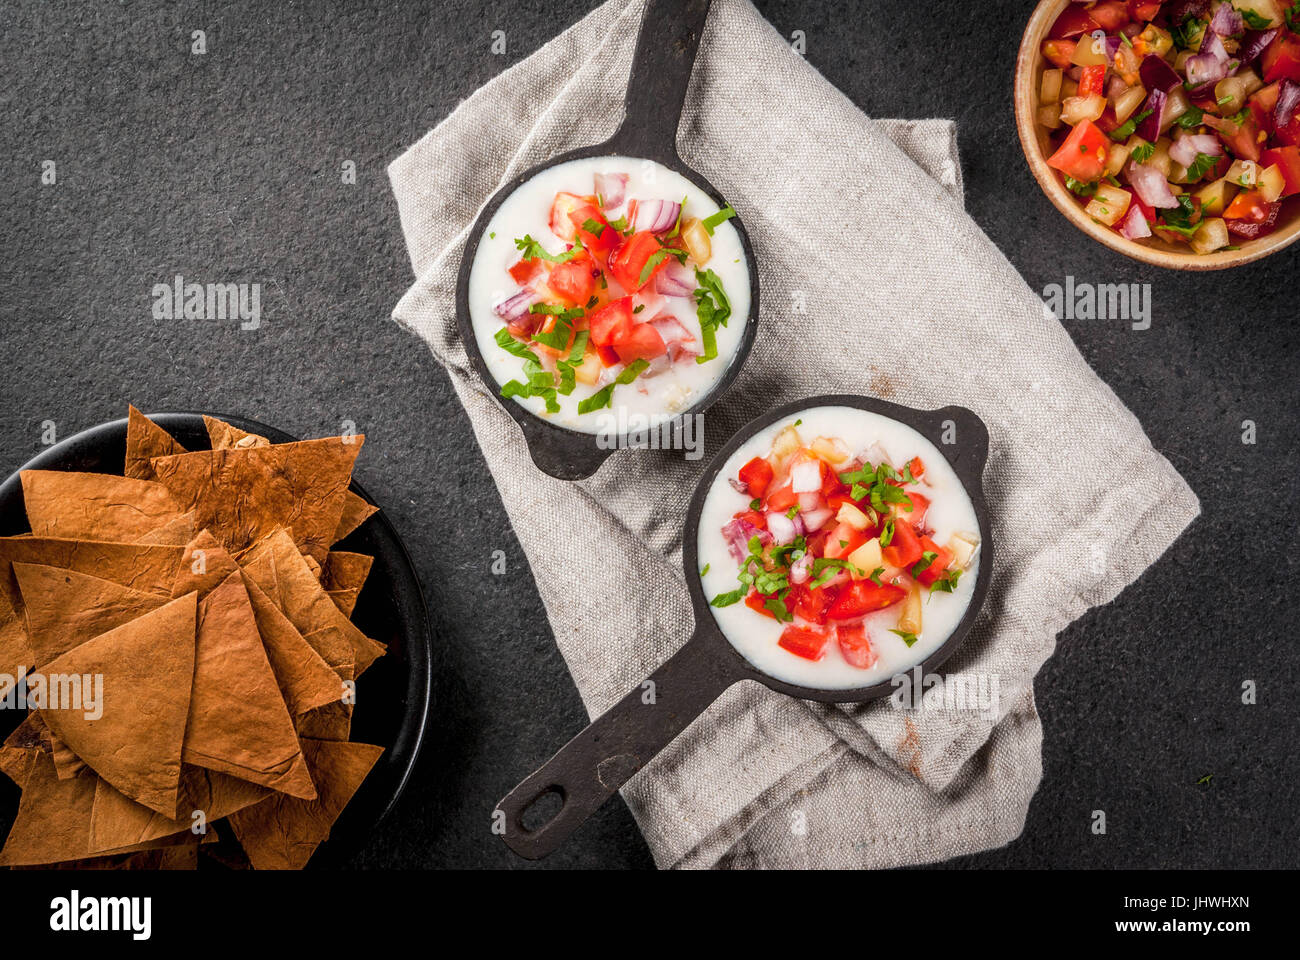 Mexican, LatinAmerican cuisine. Queso blanco recipe - cream cheese, cream, fresh stewed vegetables tomatoes, onions, peppers,  herbs. With Baked Torti Stock Photo